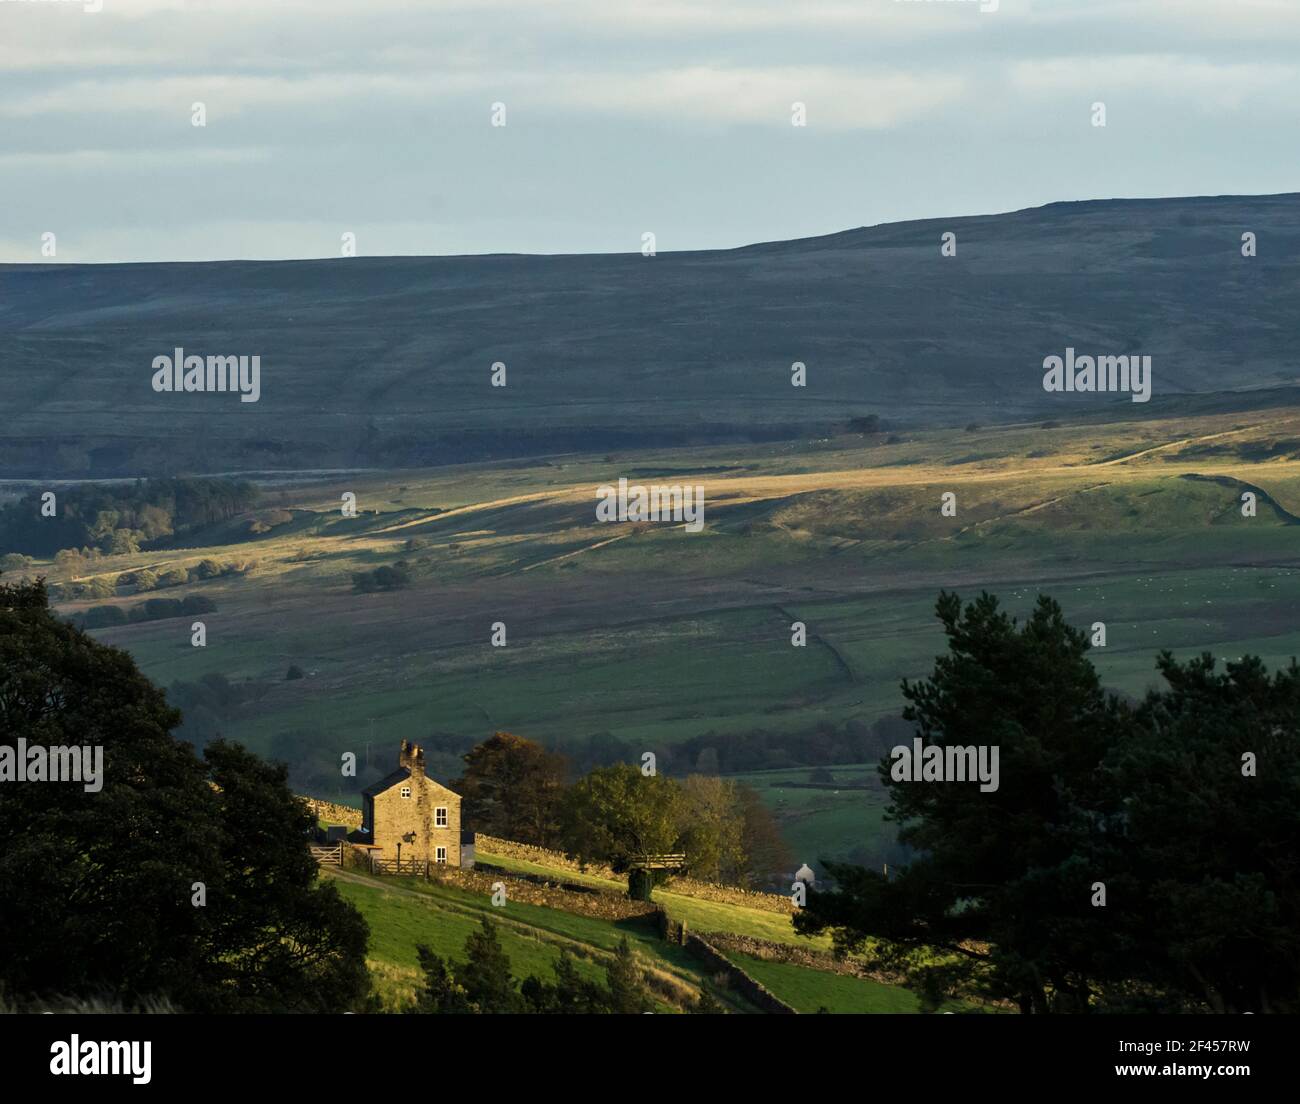 A lone house in sunlight against a backdrop of dark, brooding hills (Weardale, the North Pennines, County Durham, UK) Stock Photo